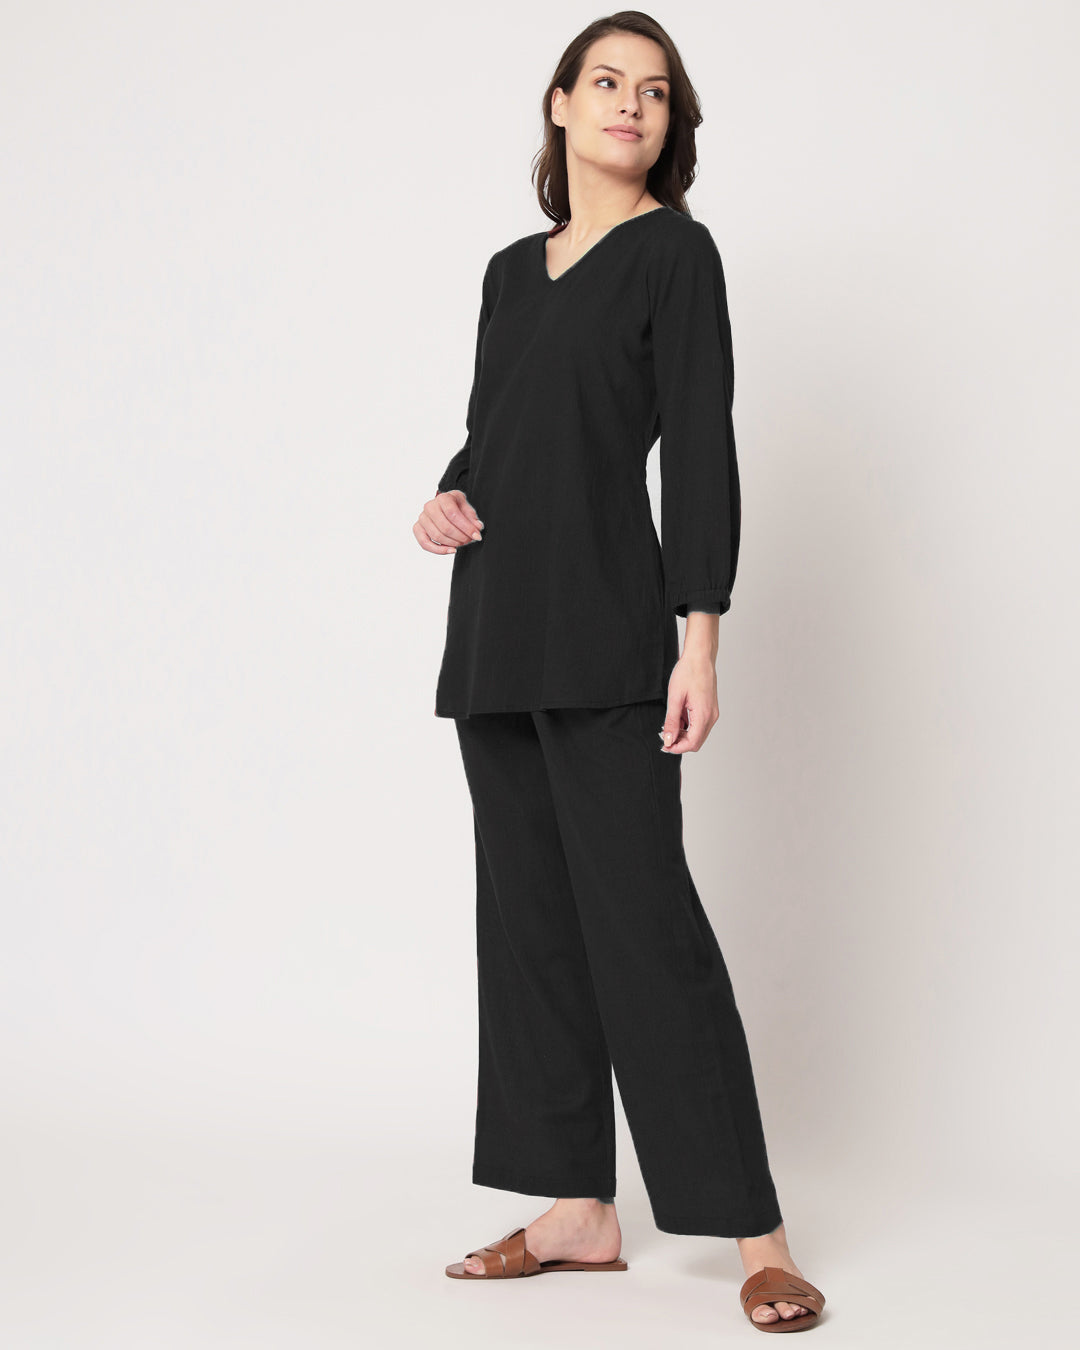 Classic Black Bishop Sleeves Solid Top (Without Bottoms)